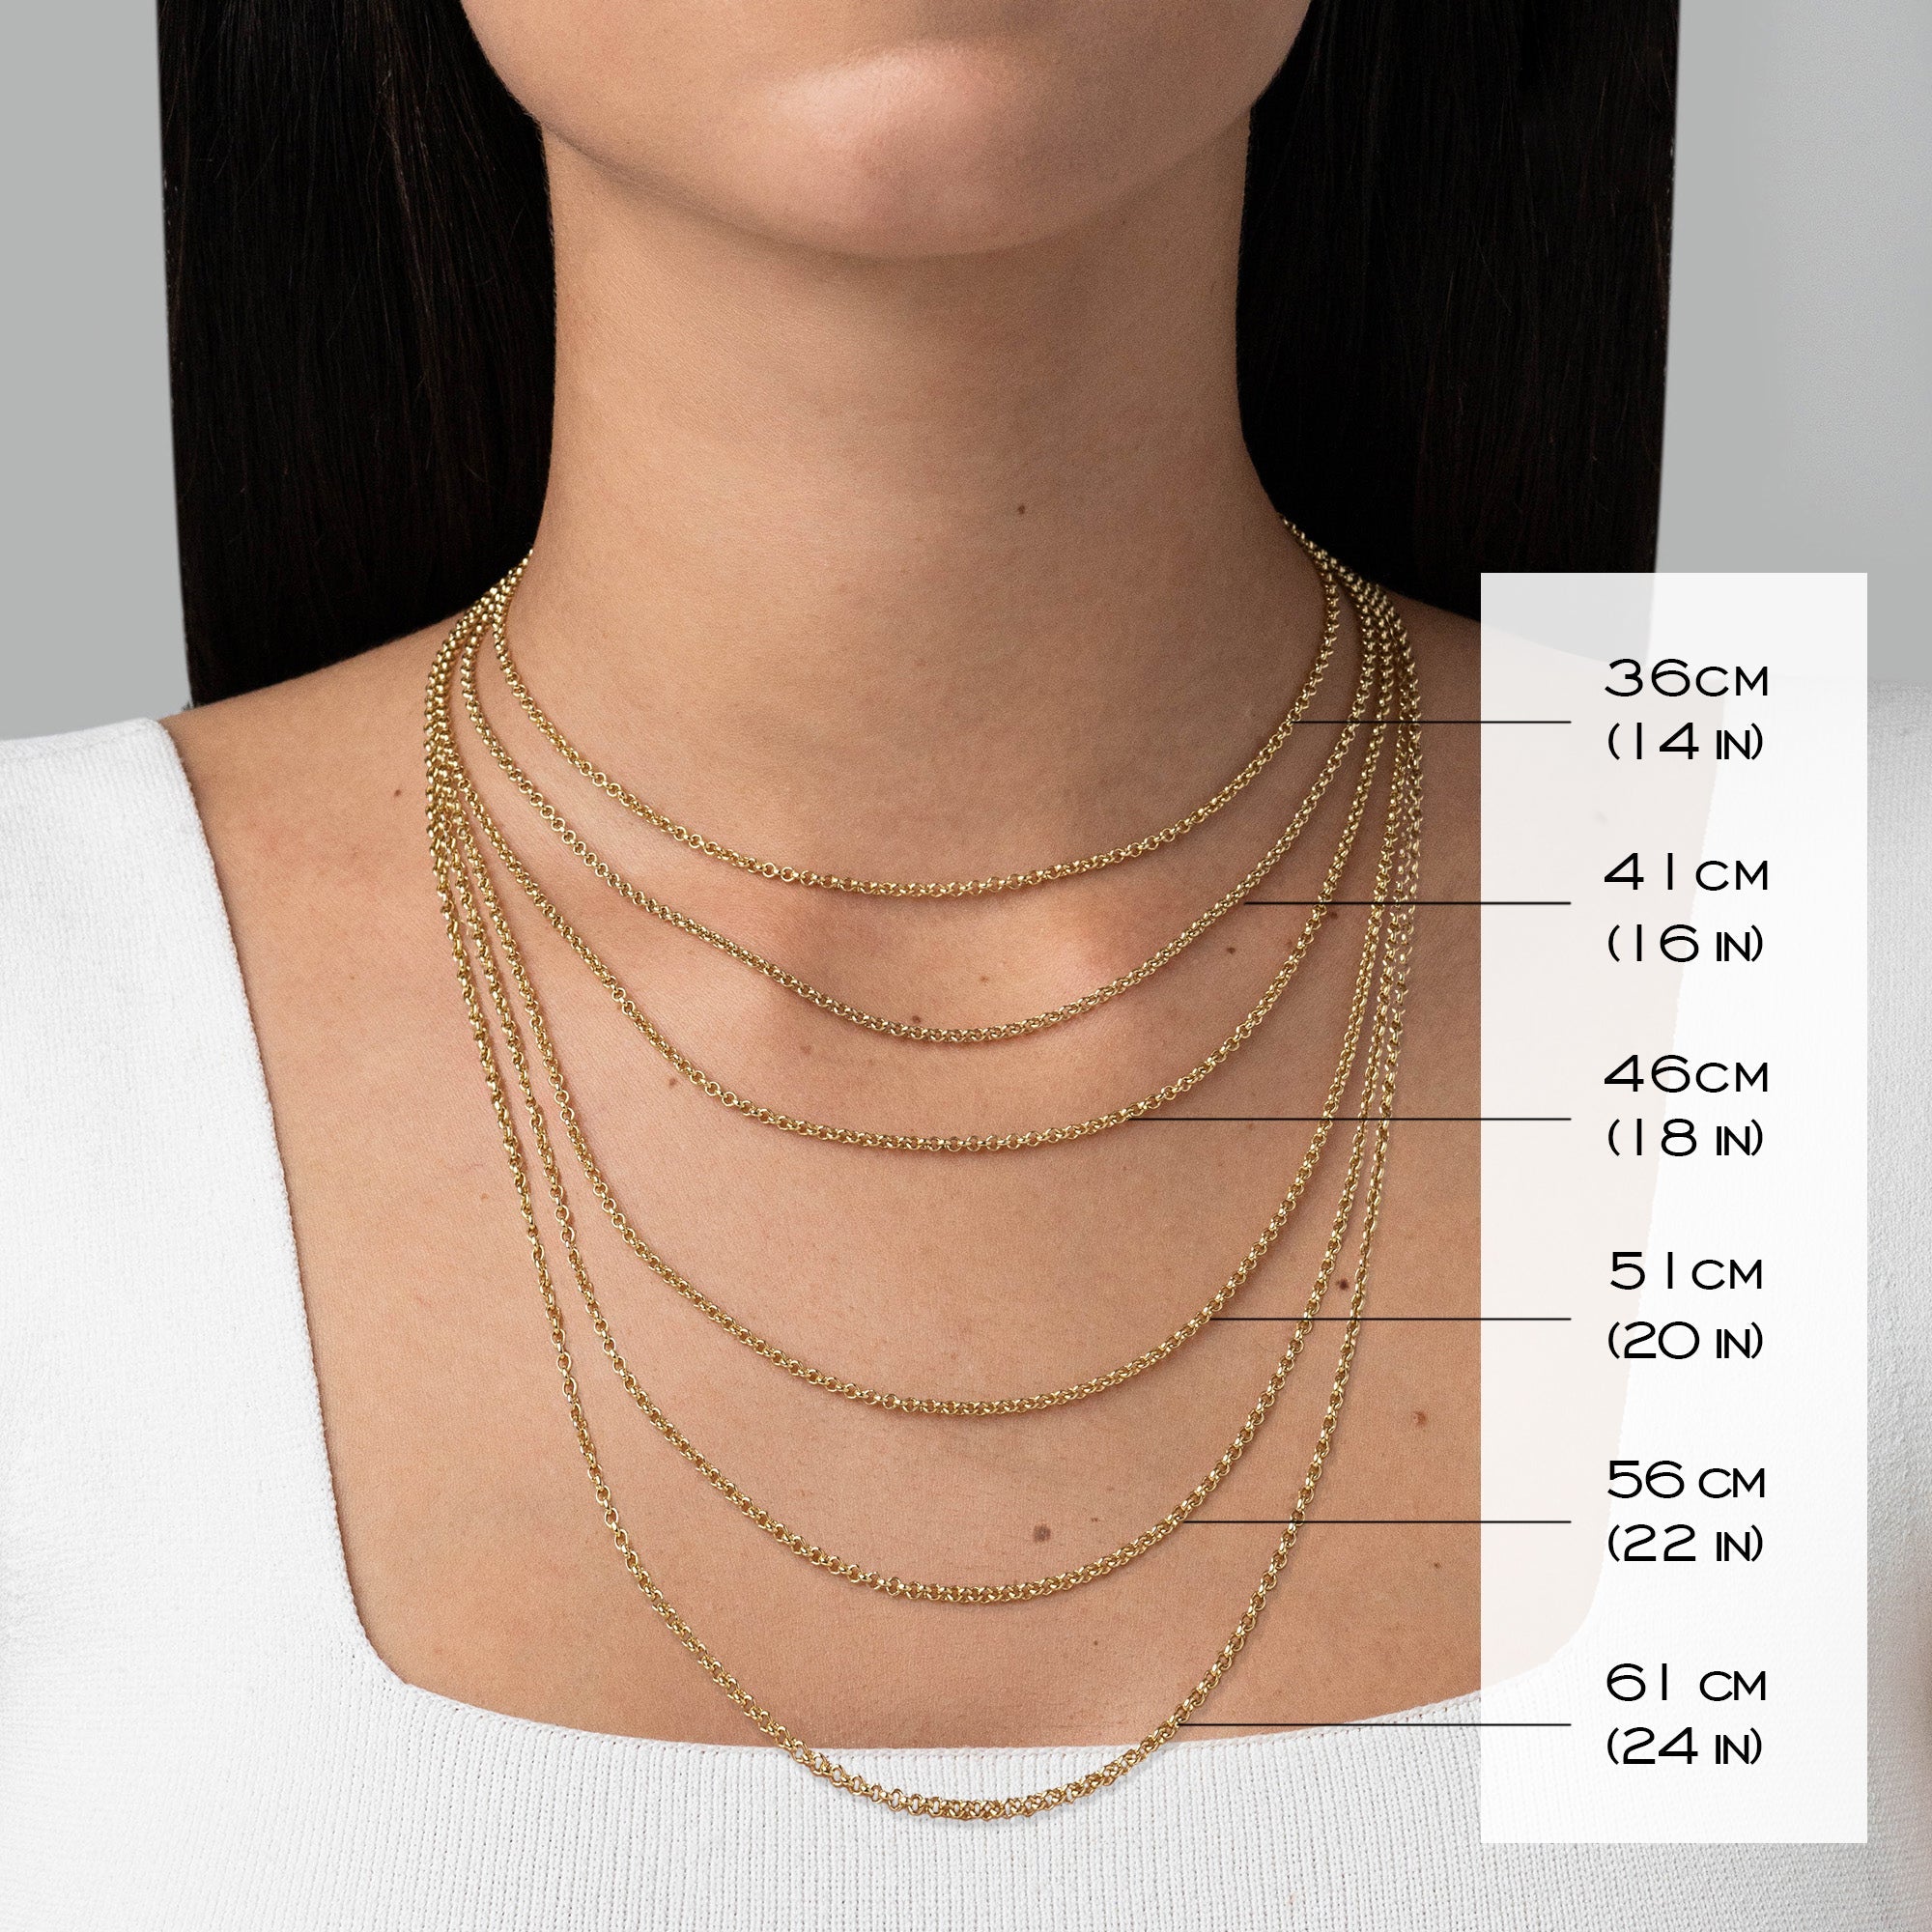 886 Royal Mint Necklaces 886 Belcher Chain in 9ct Yellow Gold